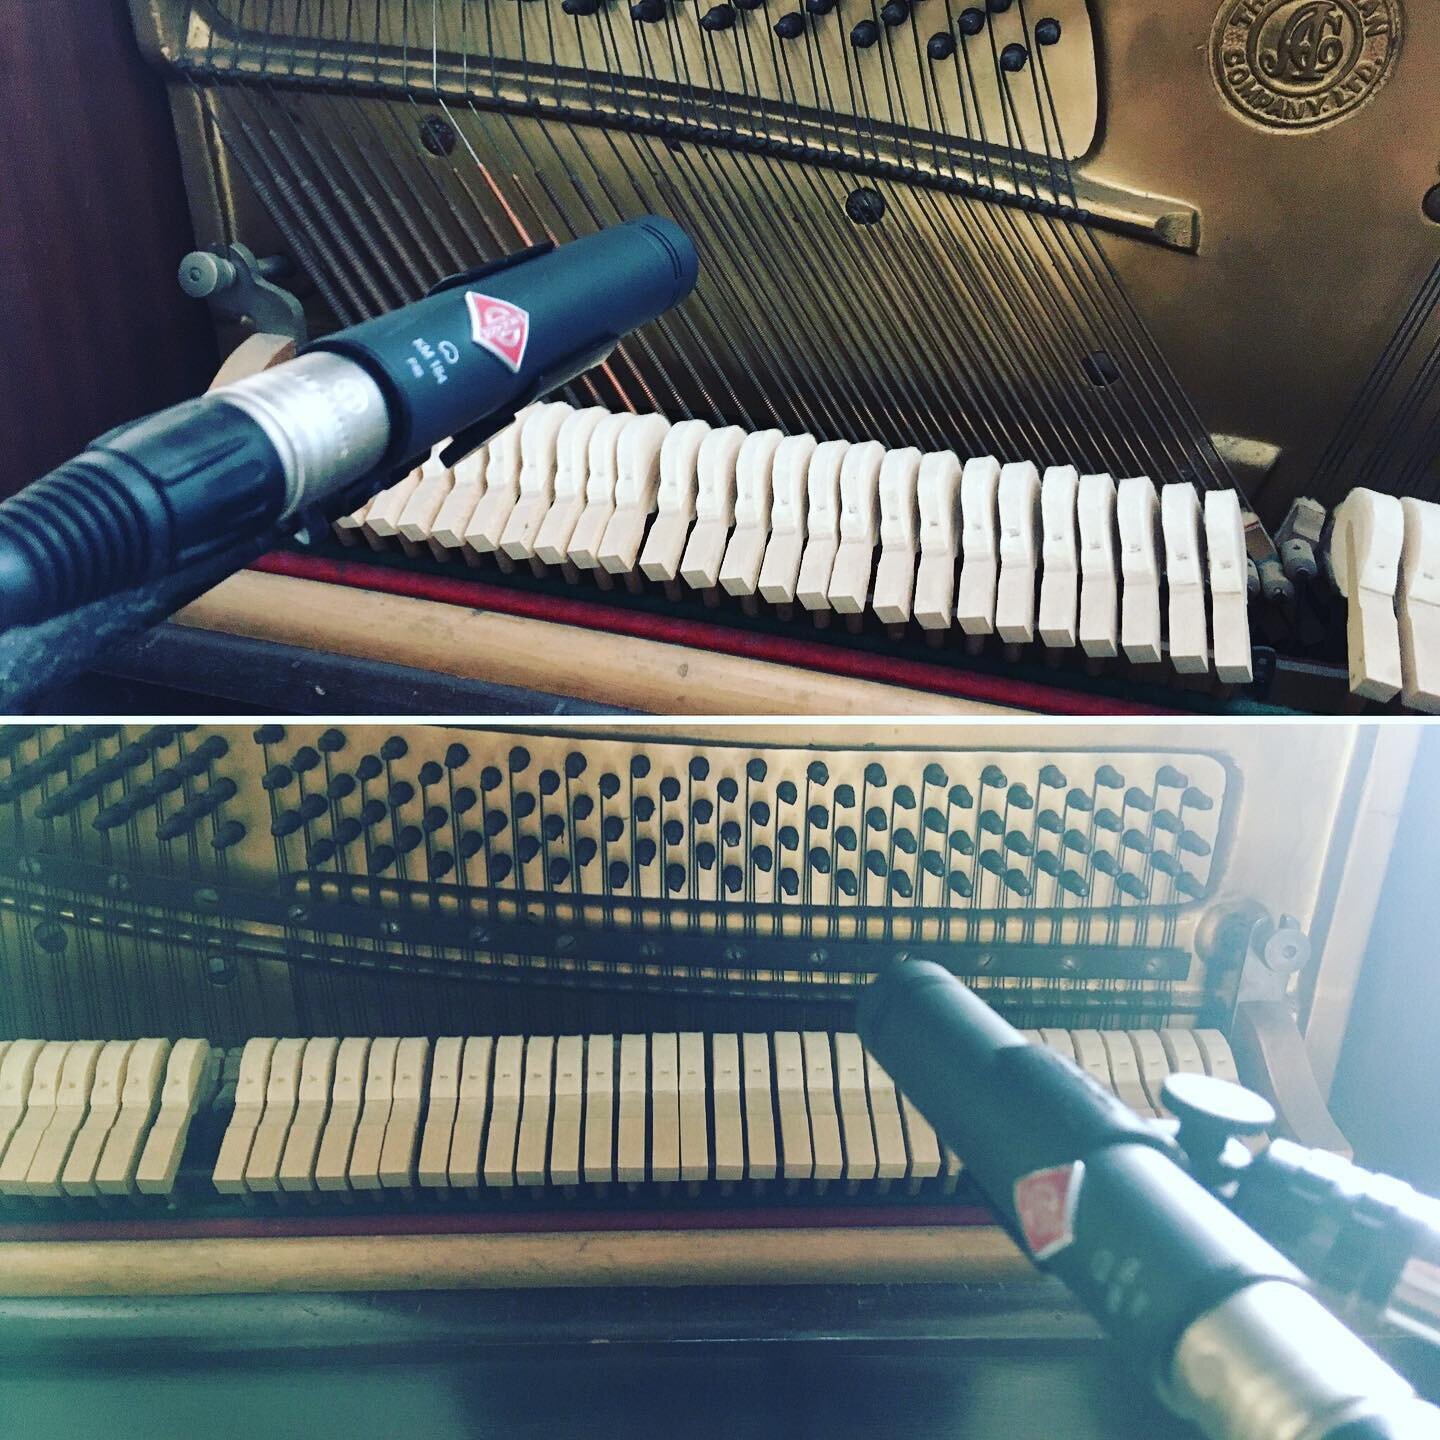 Great times recording my old piano for the amazing Shammi Pithia. This is the piano I grew up playing - still sounds amazing. #remoterecording #piano